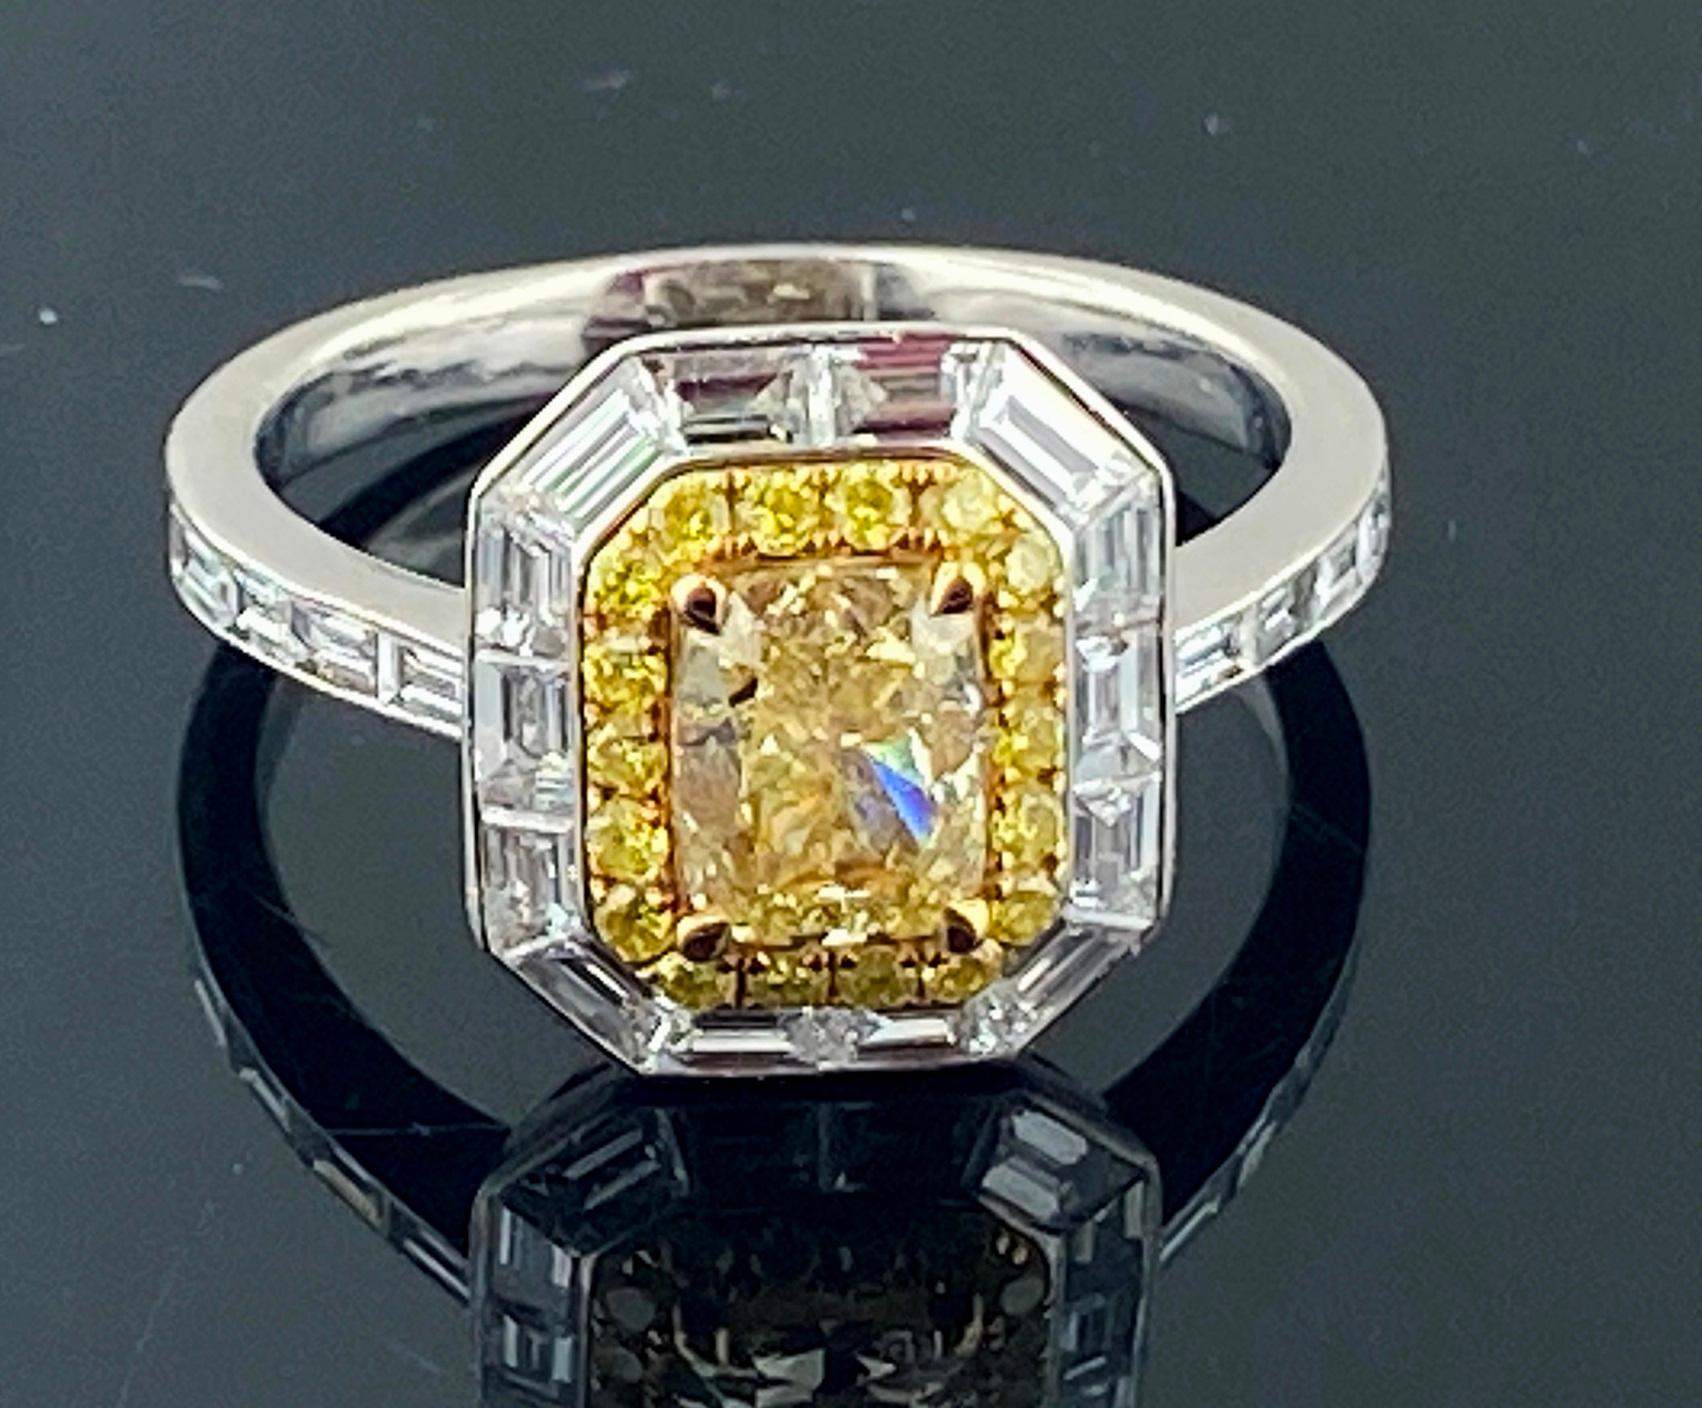 Set in Platinum, weighing 6.46 grams, is one 1.13 carat Cushion Cut Fancy Yellow Diamond, Clarity Grade of: VVS-1, GIA certificate # 2181175180.  Surrounding the center diamond are 18 Round Brilliant Cut Fancy Yellow diamonds, Clarity of: SI,